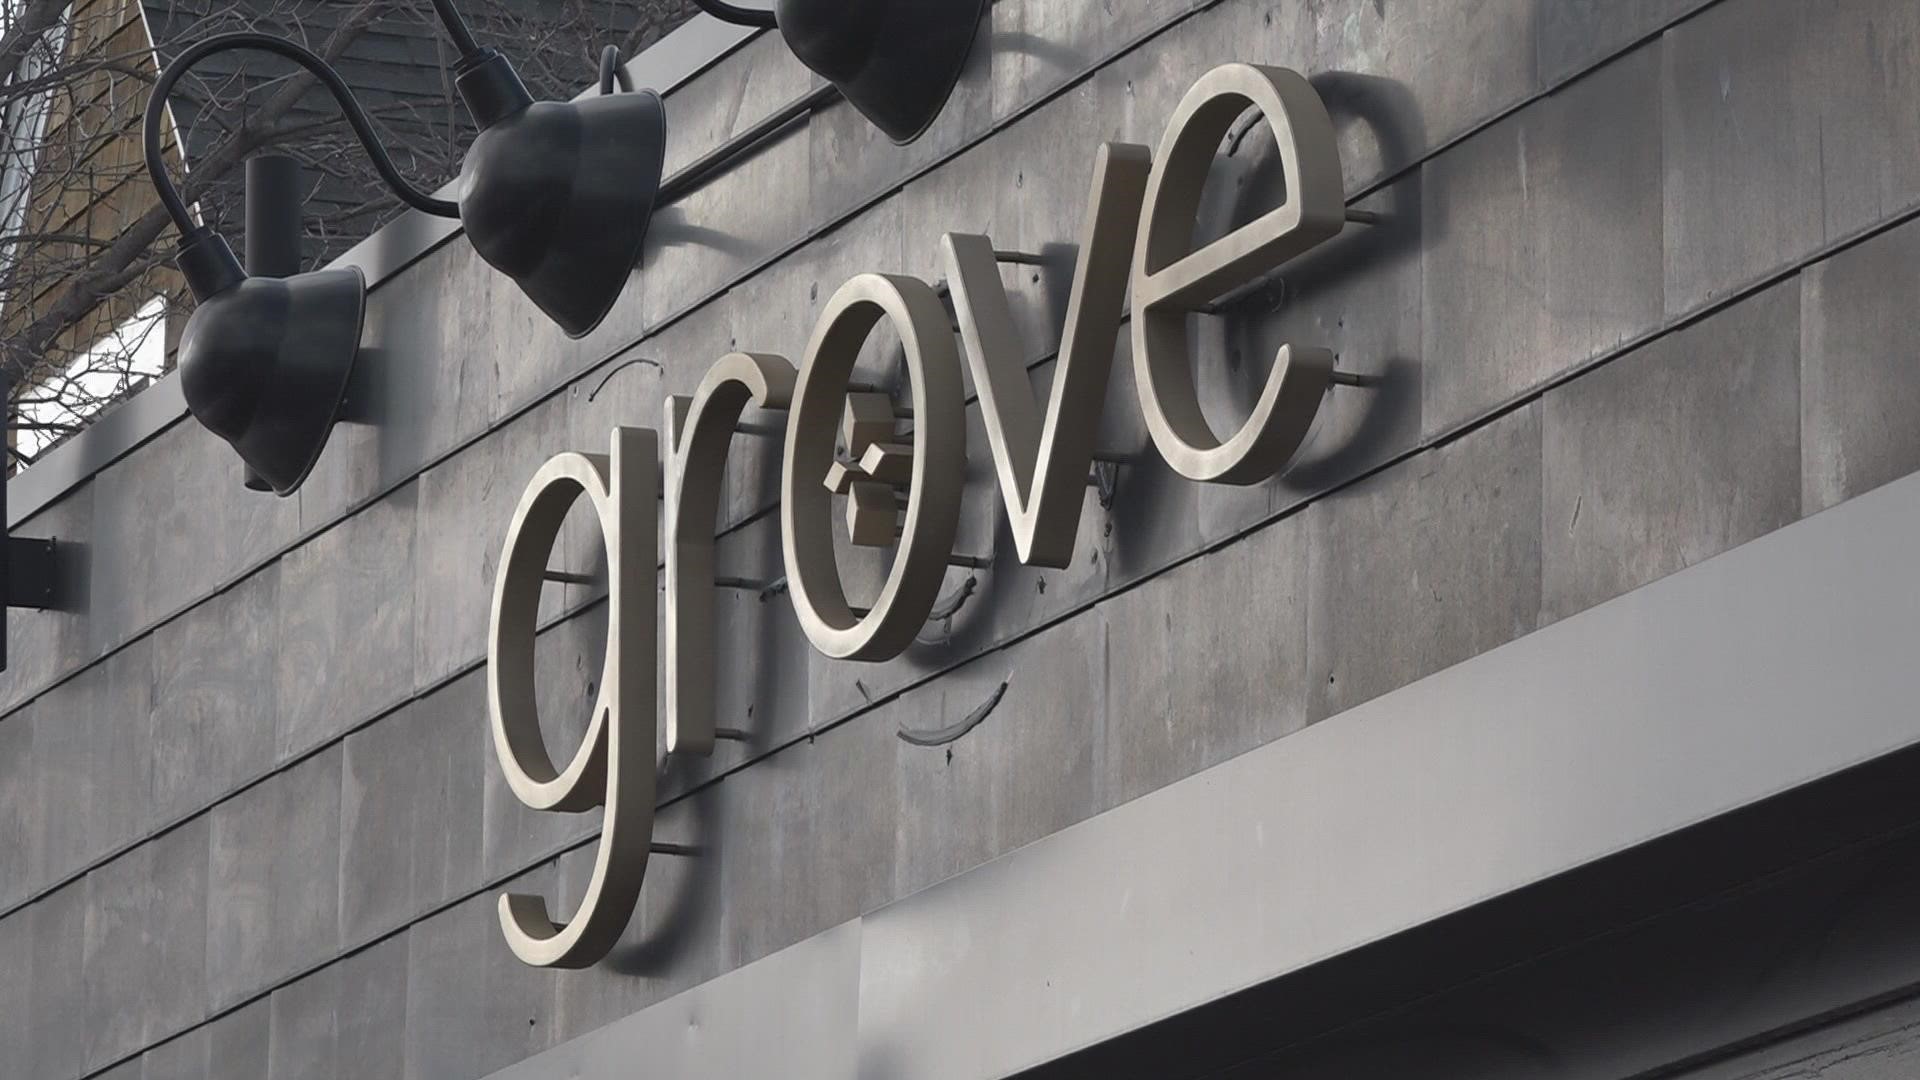 Grove's owners didn't feel like opening with pandemic restrictions was sustainable.